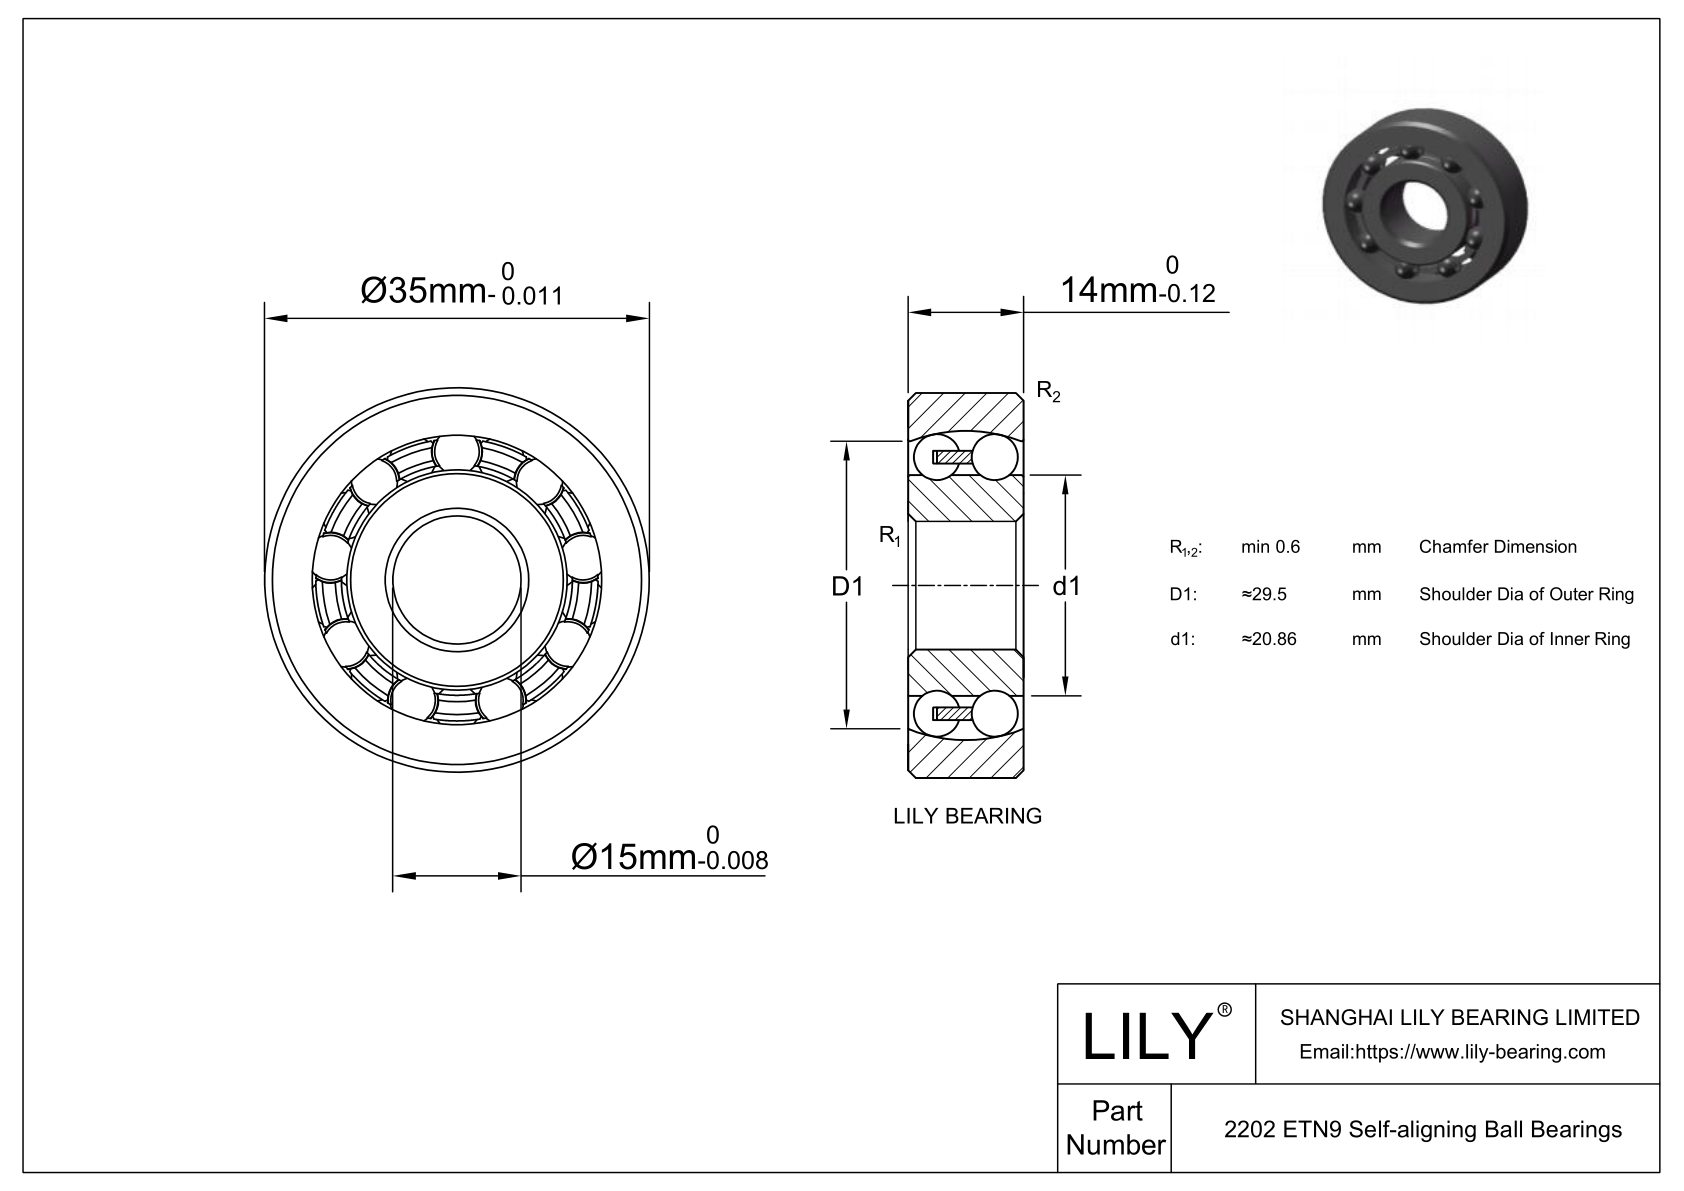 S2202 ETN9 Stainless Steel Self Aligning Ball Bearings cad drawing